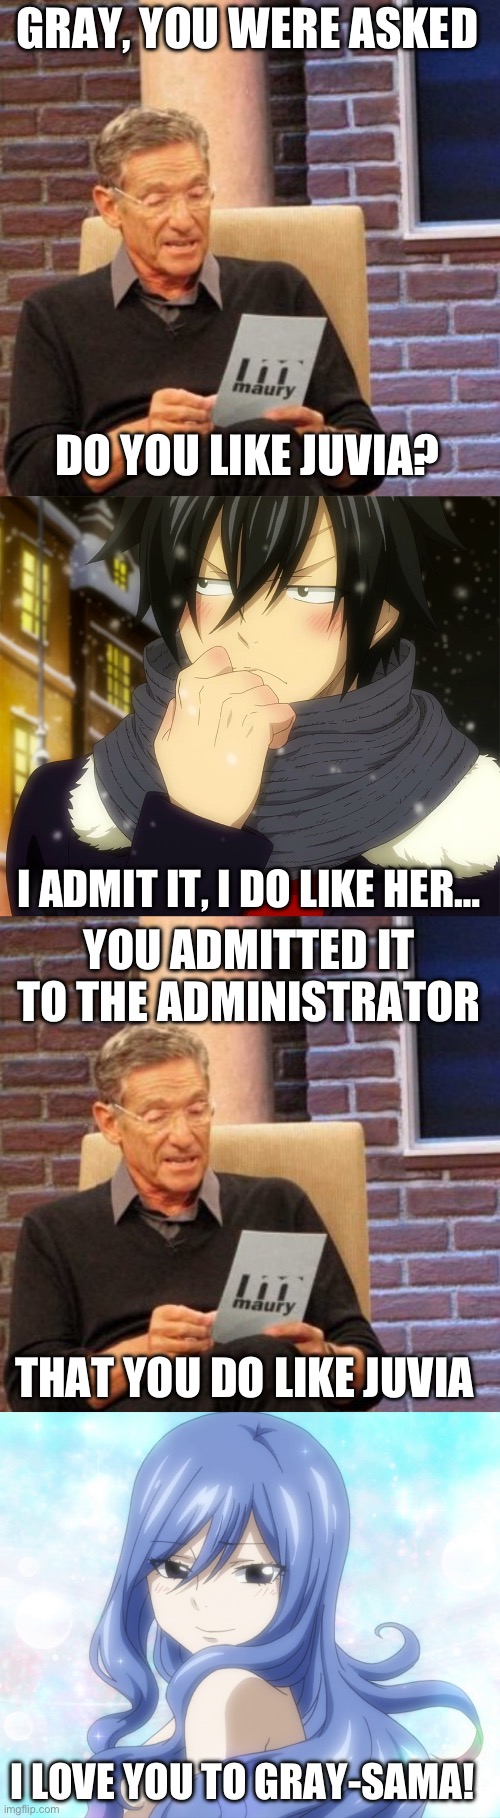 Maury Lie Detector Part 5, Gray’s Shocking Confession about his Feelings for Juvia! | GRAY, YOU WERE ASKED; DO YOU LIKE JUVIA? I ADMIT IT, I DO LIKE HER…; YOU ADMITTED IT TO THE ADMINISTRATOR; THAT YOU DO LIKE JUVIA; I LOVE YOU TO GRAY-SAMA! | image tagged in memes,maury lie detector,fairy tail,gray fullbuster,juvia lockser,gruvia | made w/ Imgflip meme maker